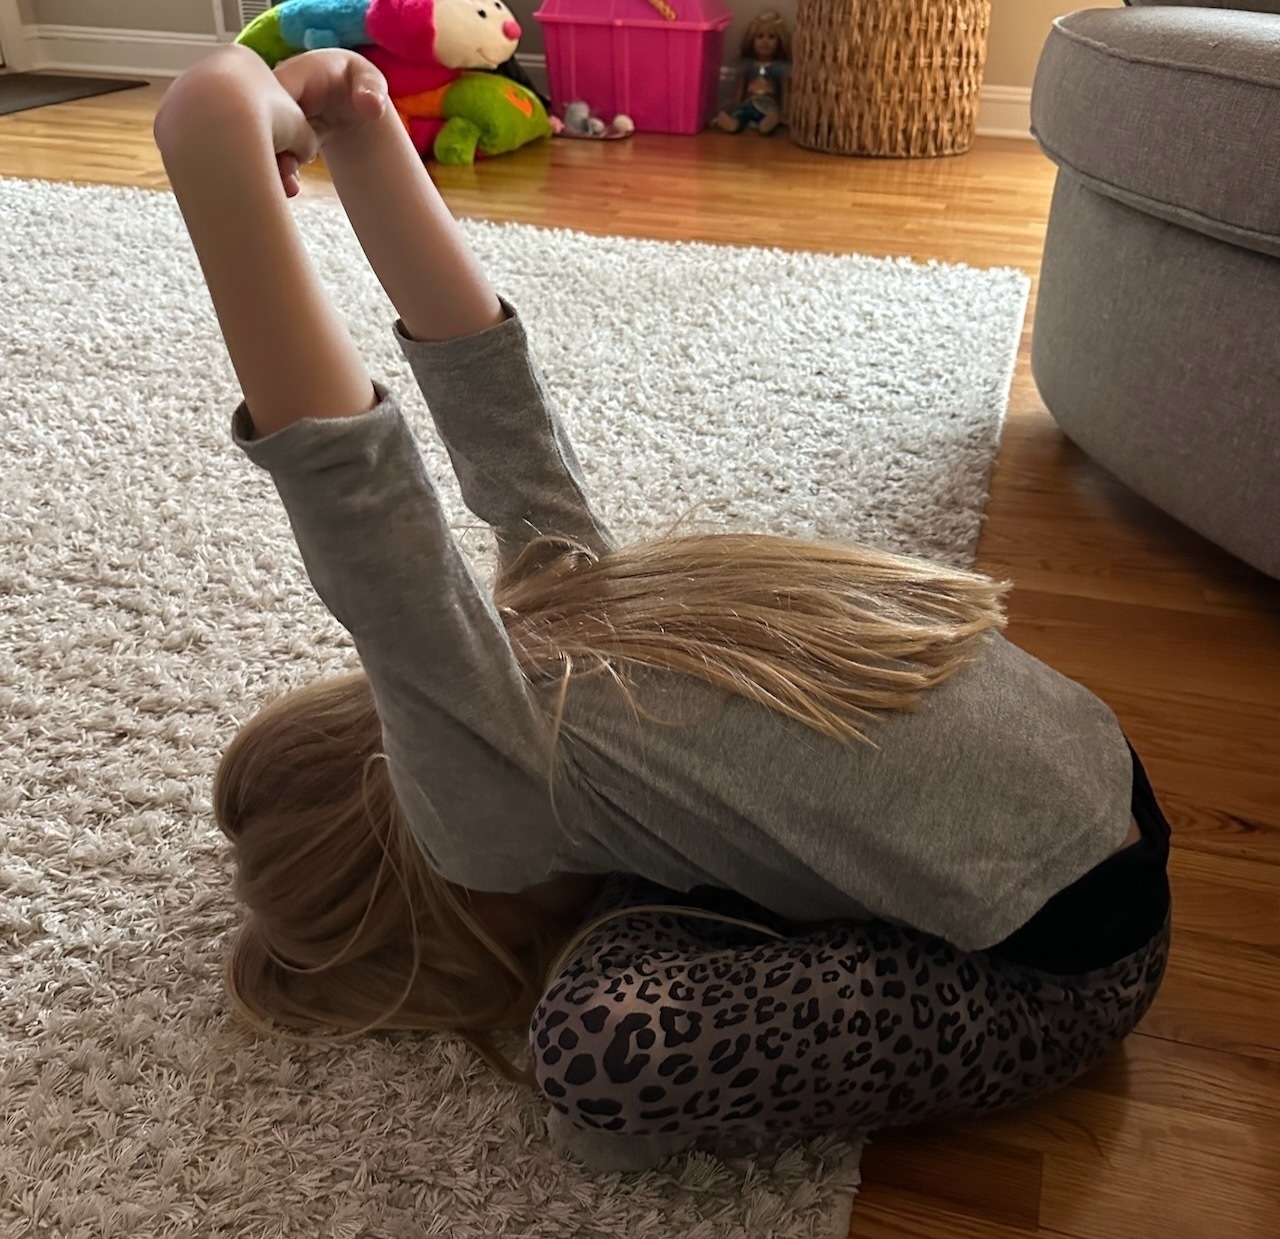 Seven Year Olds are Flexibile